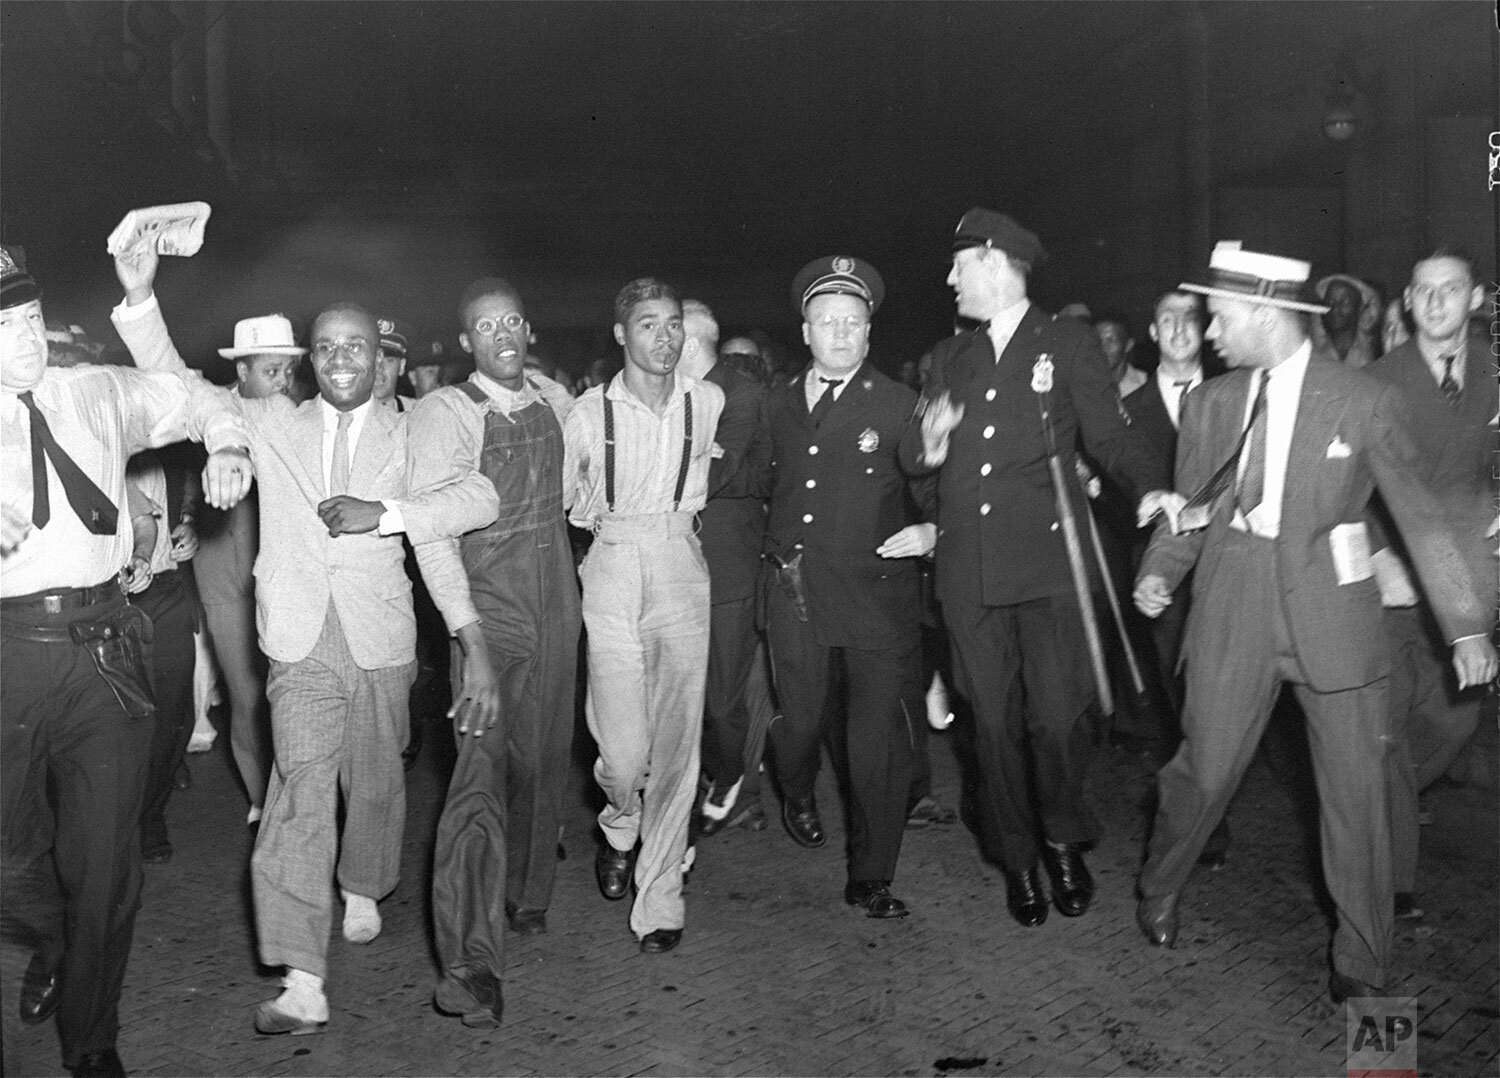  In this July 26, 1937 photo, police escort two of the five recently freed "Scottsboro Boys," Olen Montgomery, wearing glasses, third left, and Eugene Williams, wearing suspenders, forth left through the crowd greeting them upon their arrival at Penn